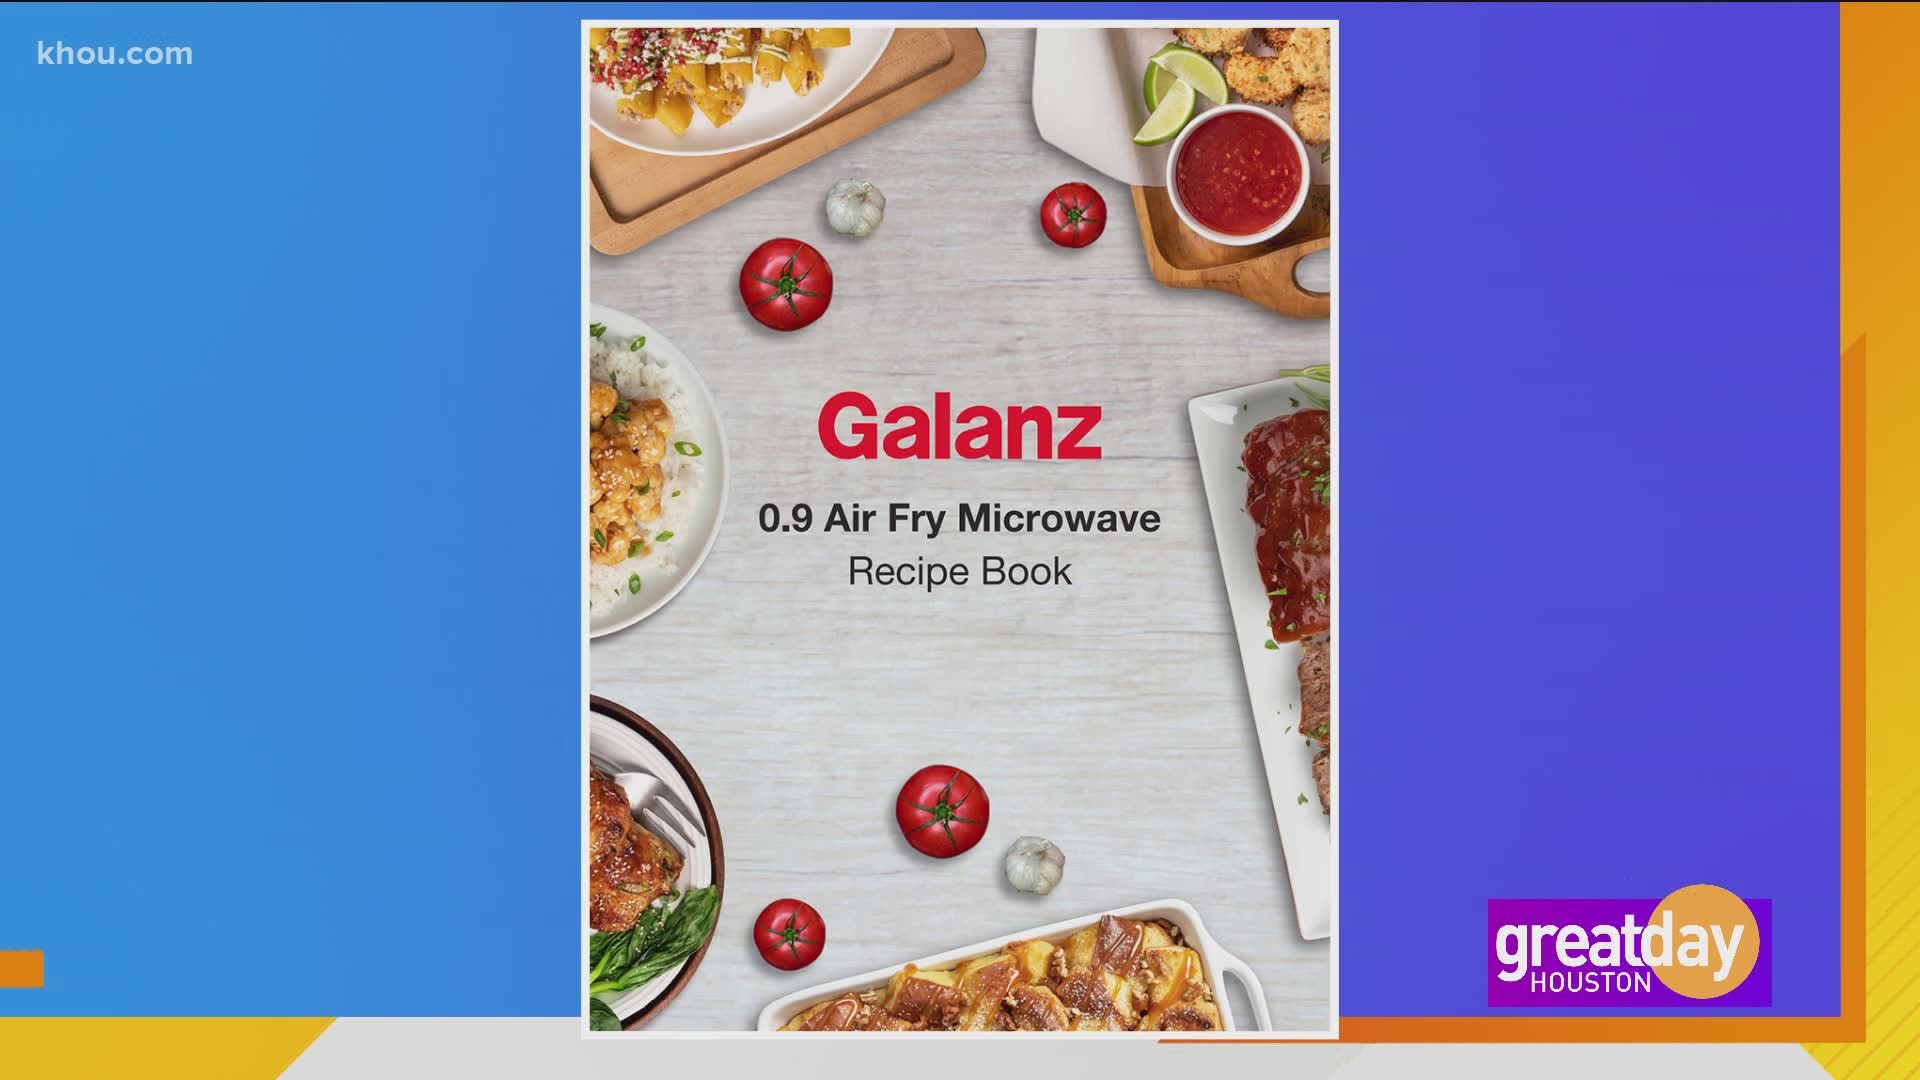 Galanz Air Fry Microwave